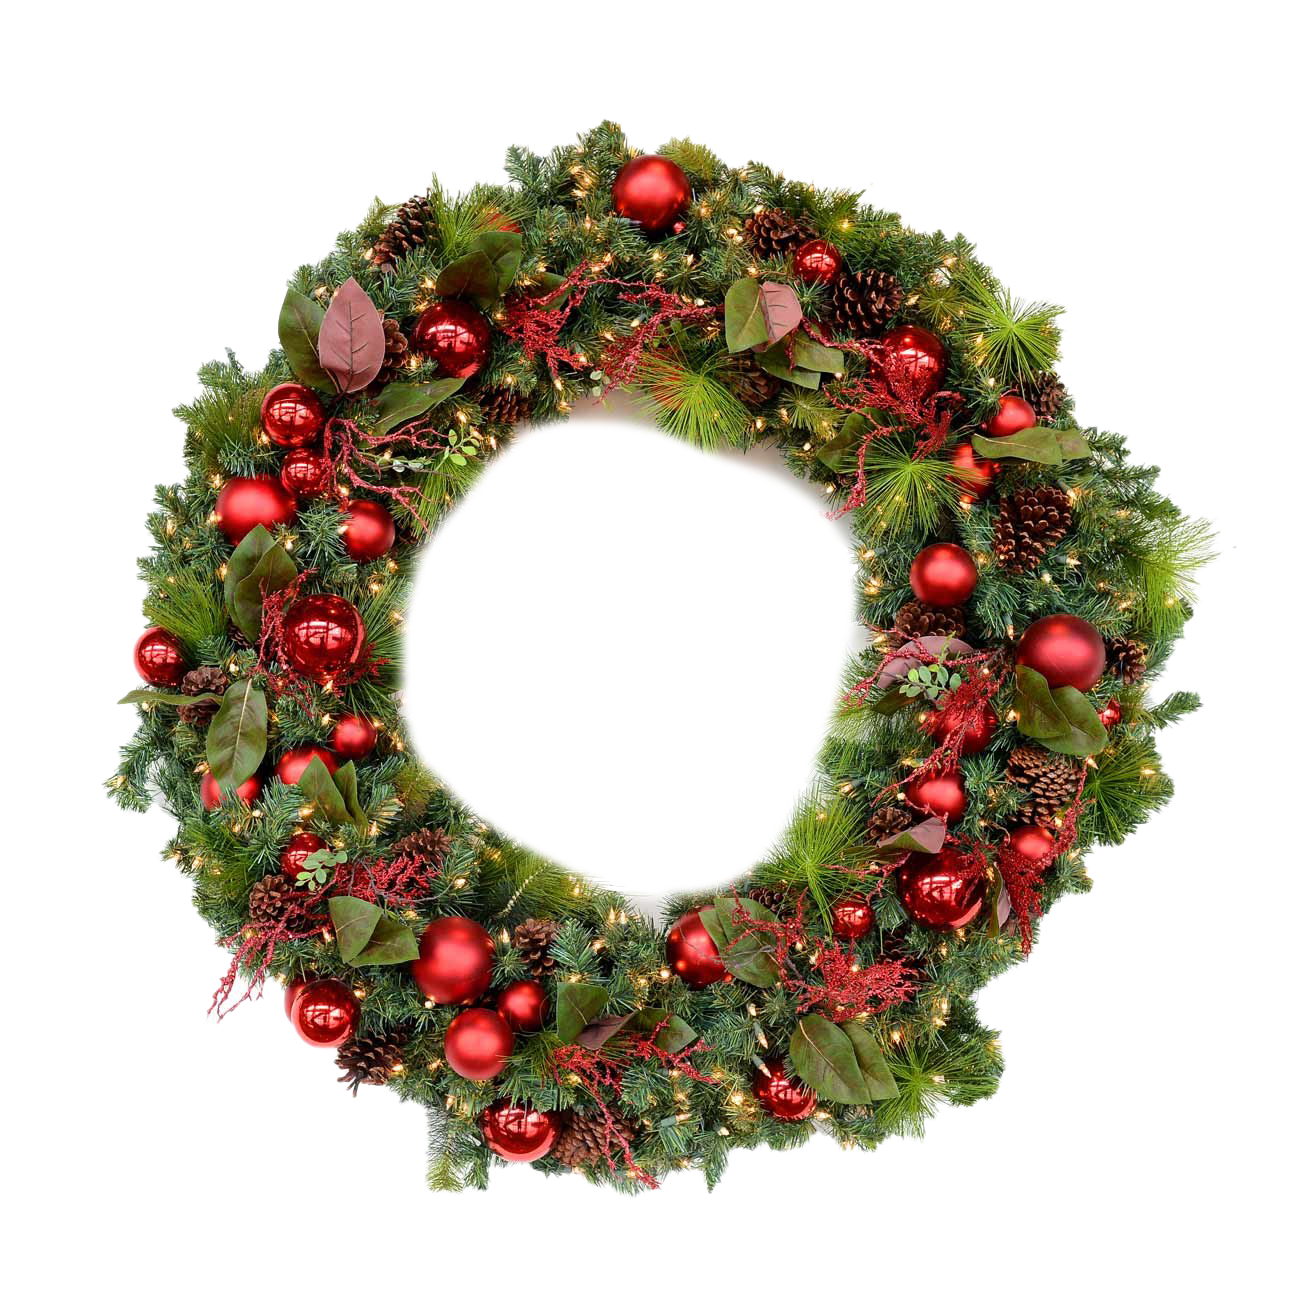 Download PNG image - Christmas Wreath Download PNG Image 